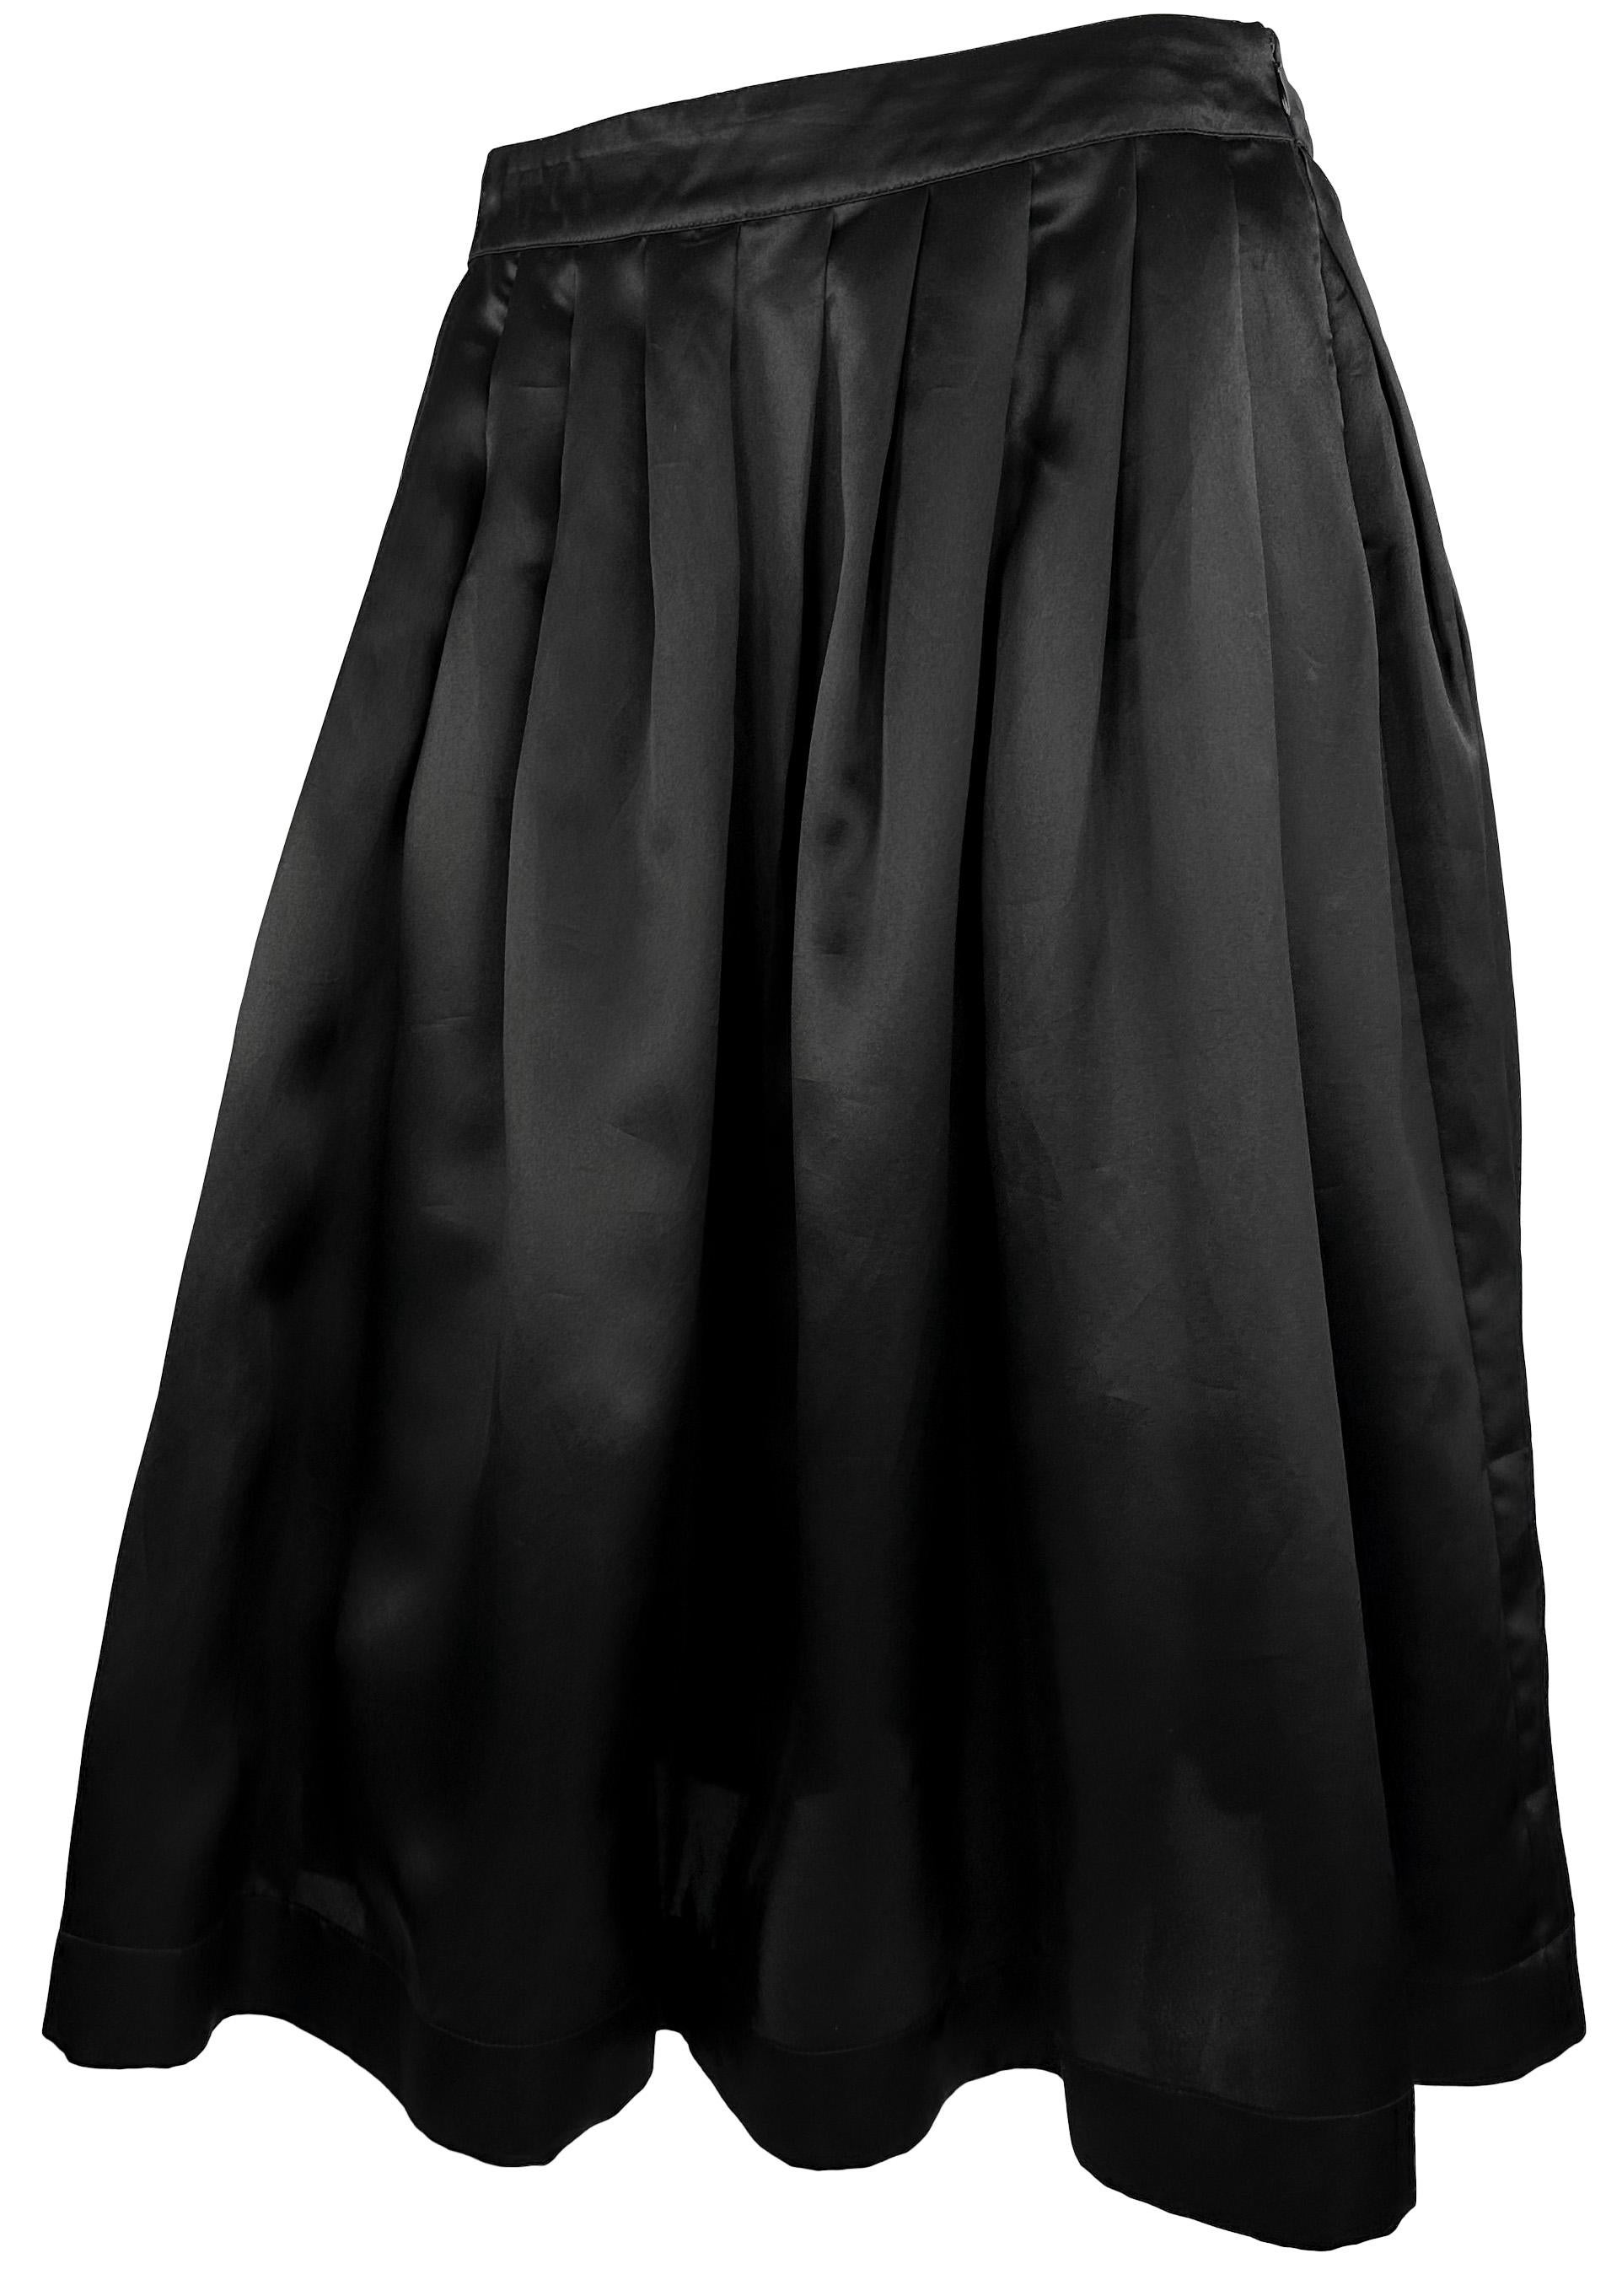 S/S 1995 Gucci by Tom Ford Runway Black Silk Satin Pleated Flare Skirt In Excellent Condition For Sale In West Hollywood, CA